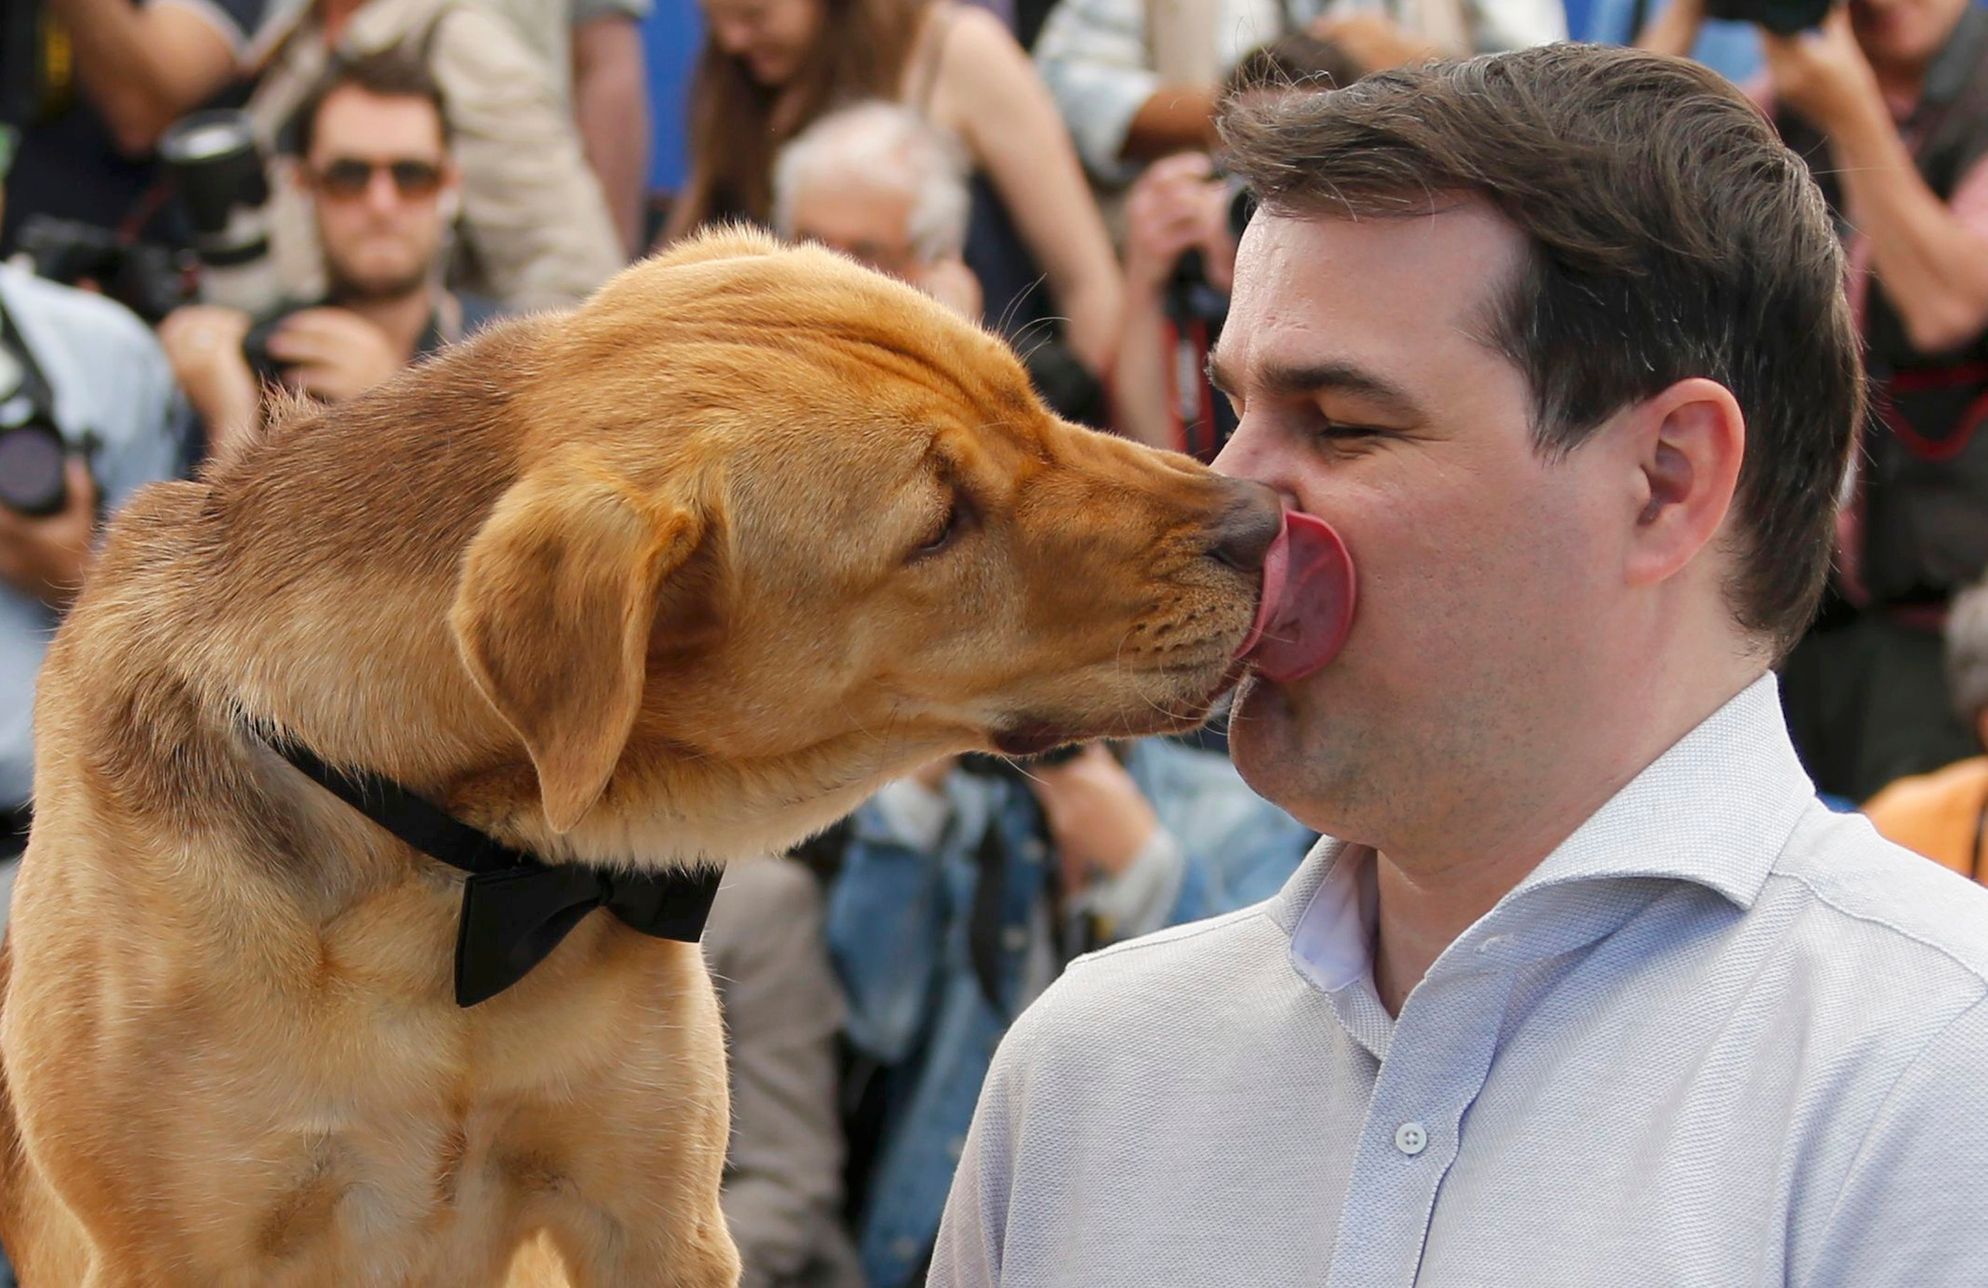 Director Kornel Mundruczo is licked by a dog during a photocall for the film &quot;Feher isten&quot; in competition for the category &quot;Un Certain Regard&quot; at the 67th Cannes Film Festival